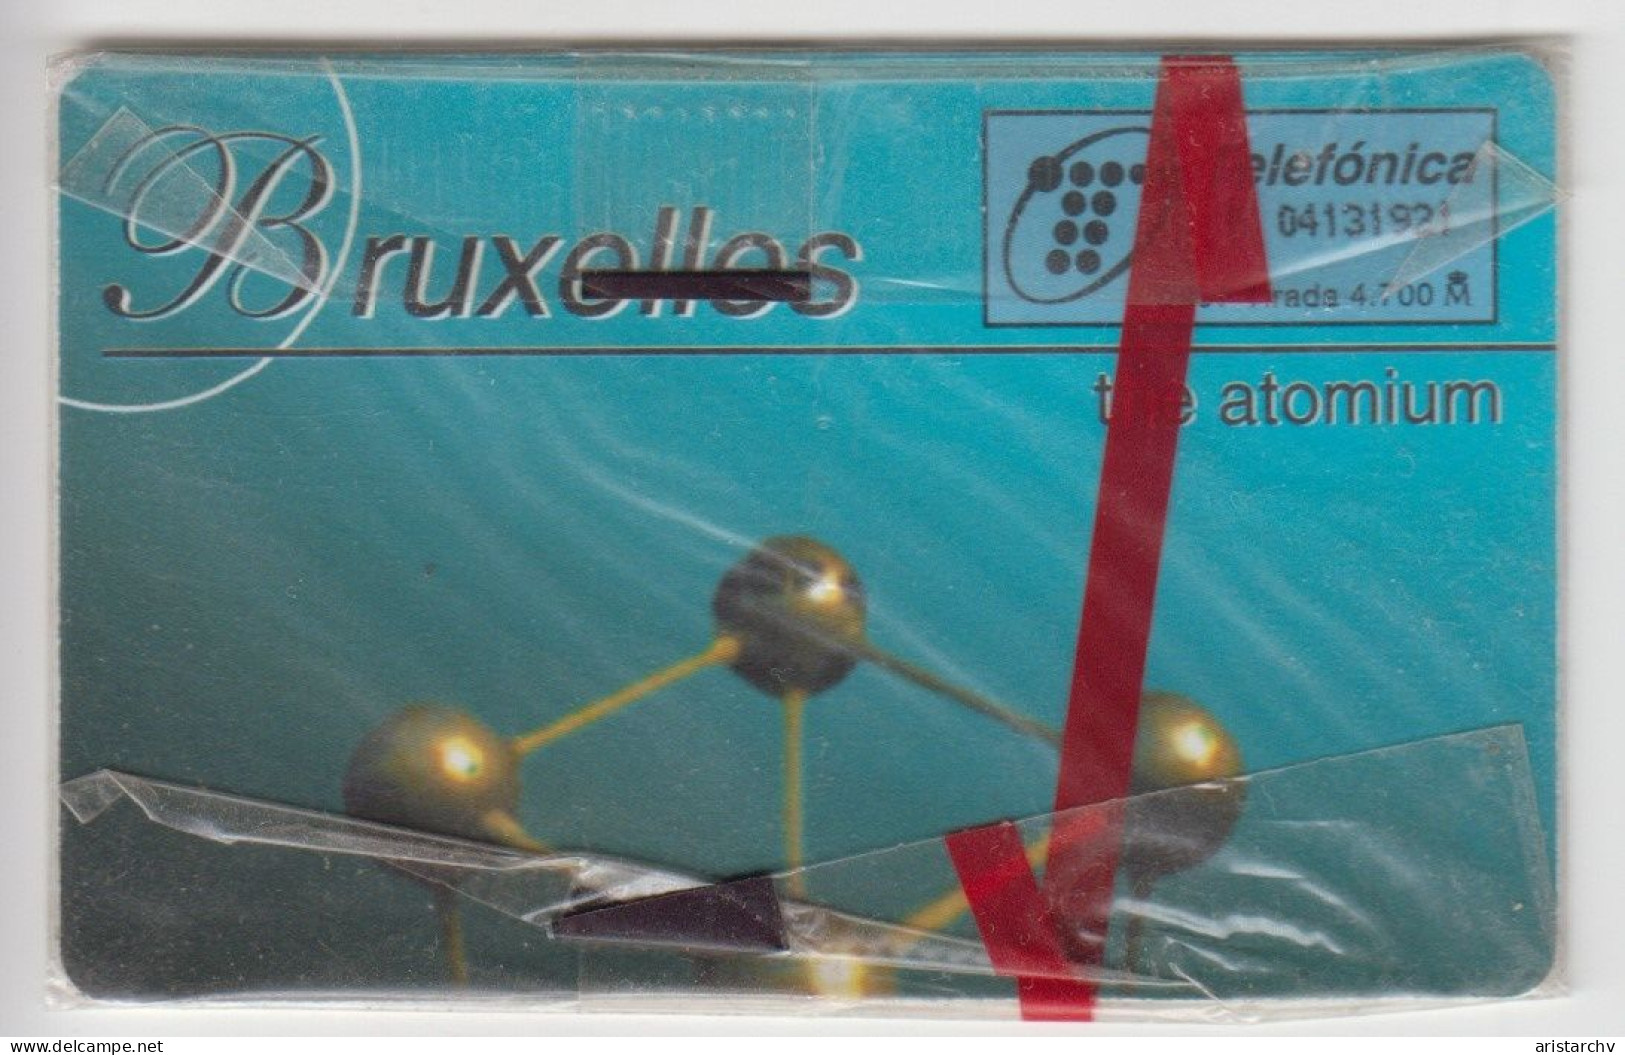 SPAIN 1997 CARD COLLECT '98 THESSALONIKI GREECE BRUXELLES ATOMIUM MINT CARD IN BLISTER - Emisiones Privadas